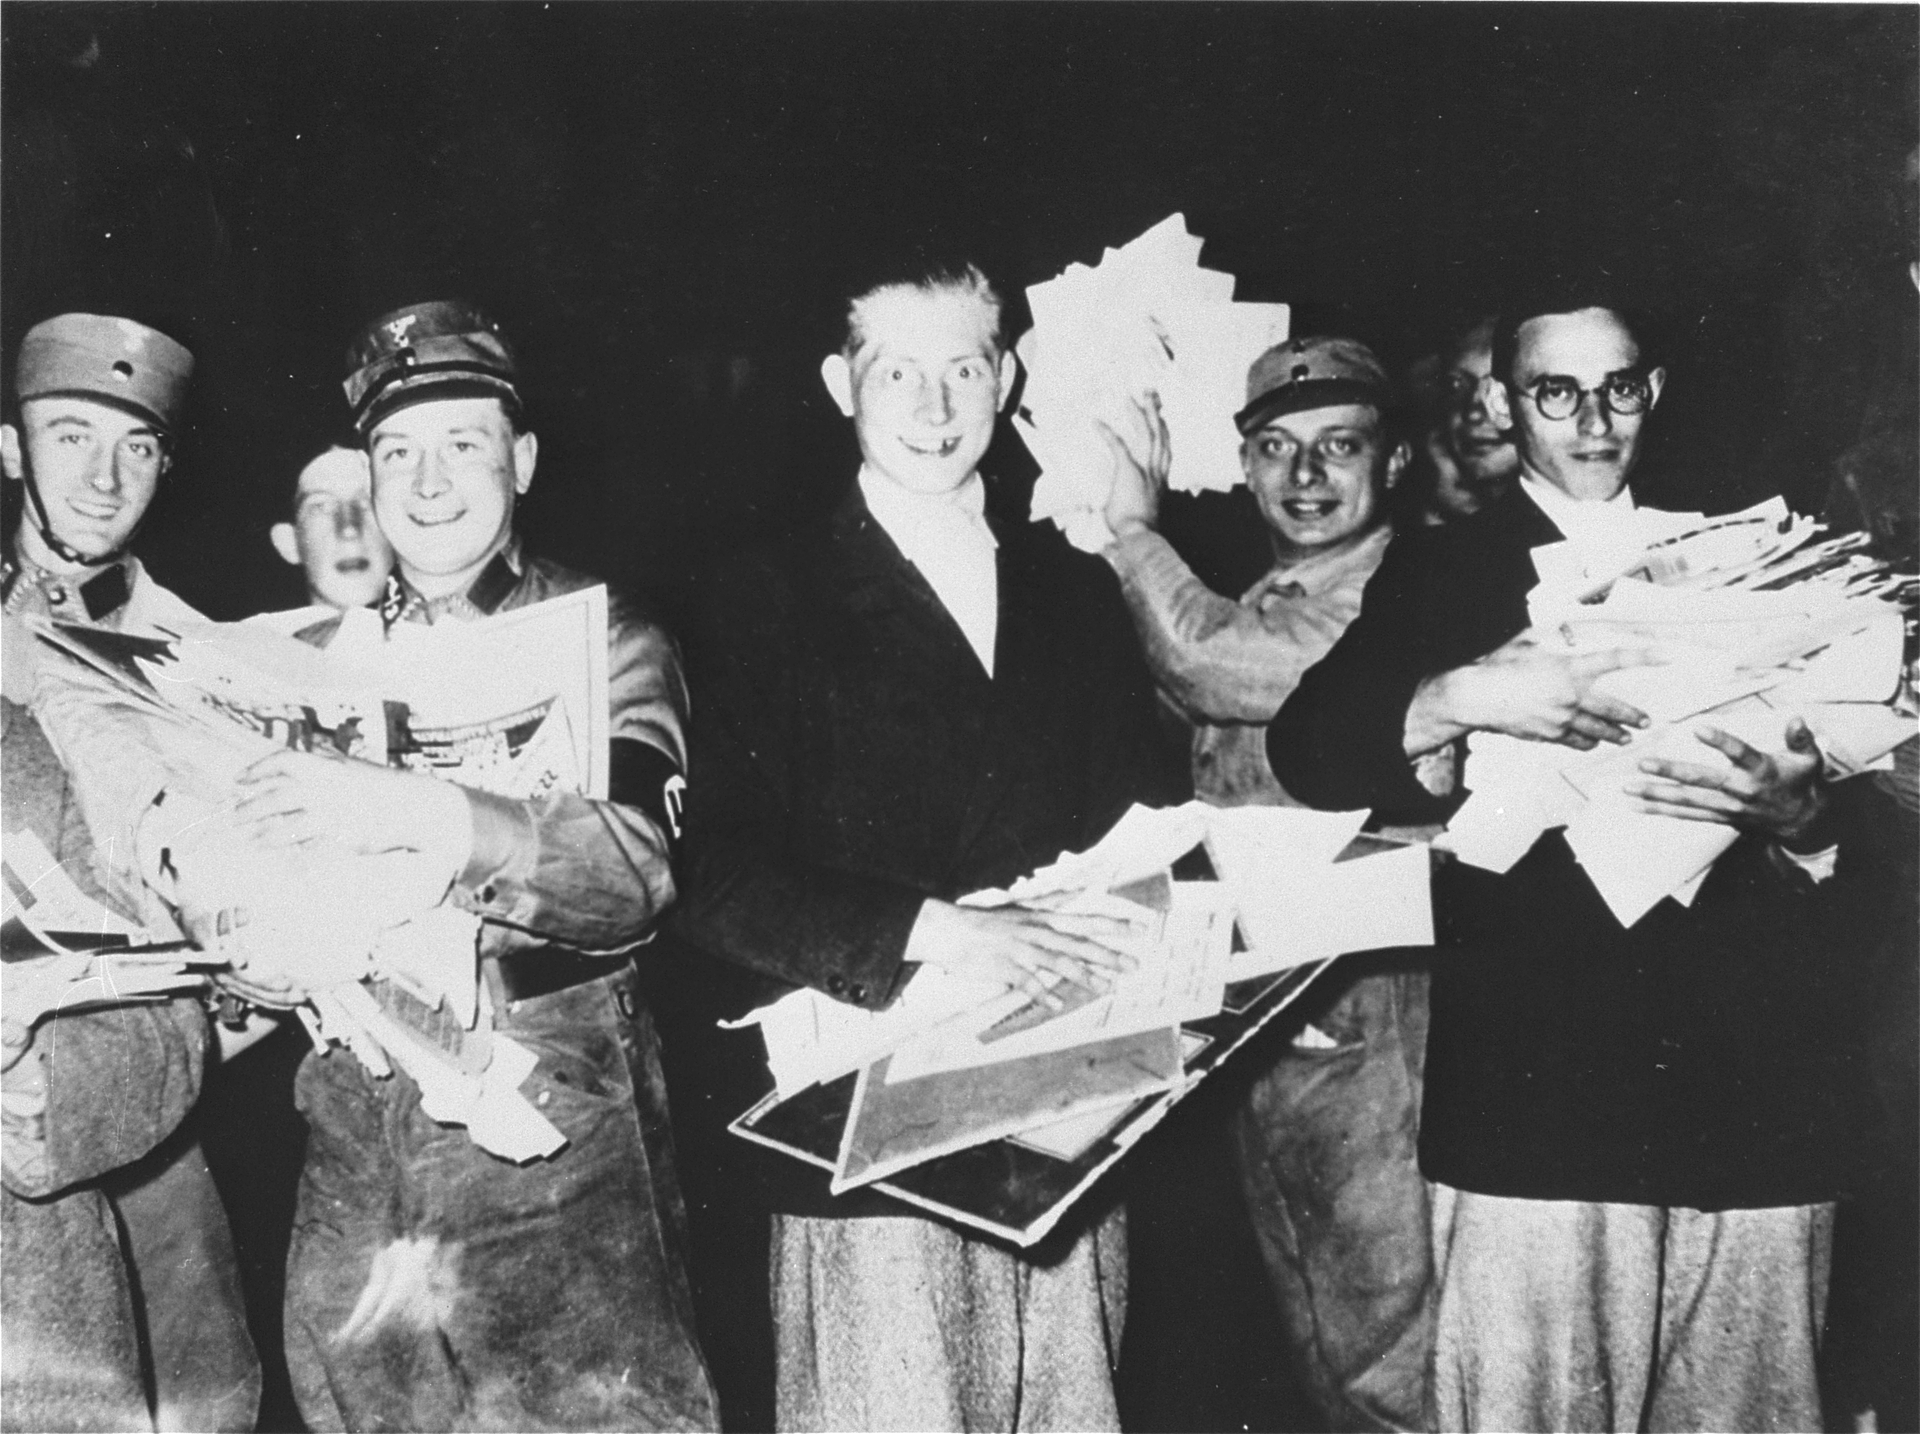 69031_students and SA members carry piles of un-German literature.jpg